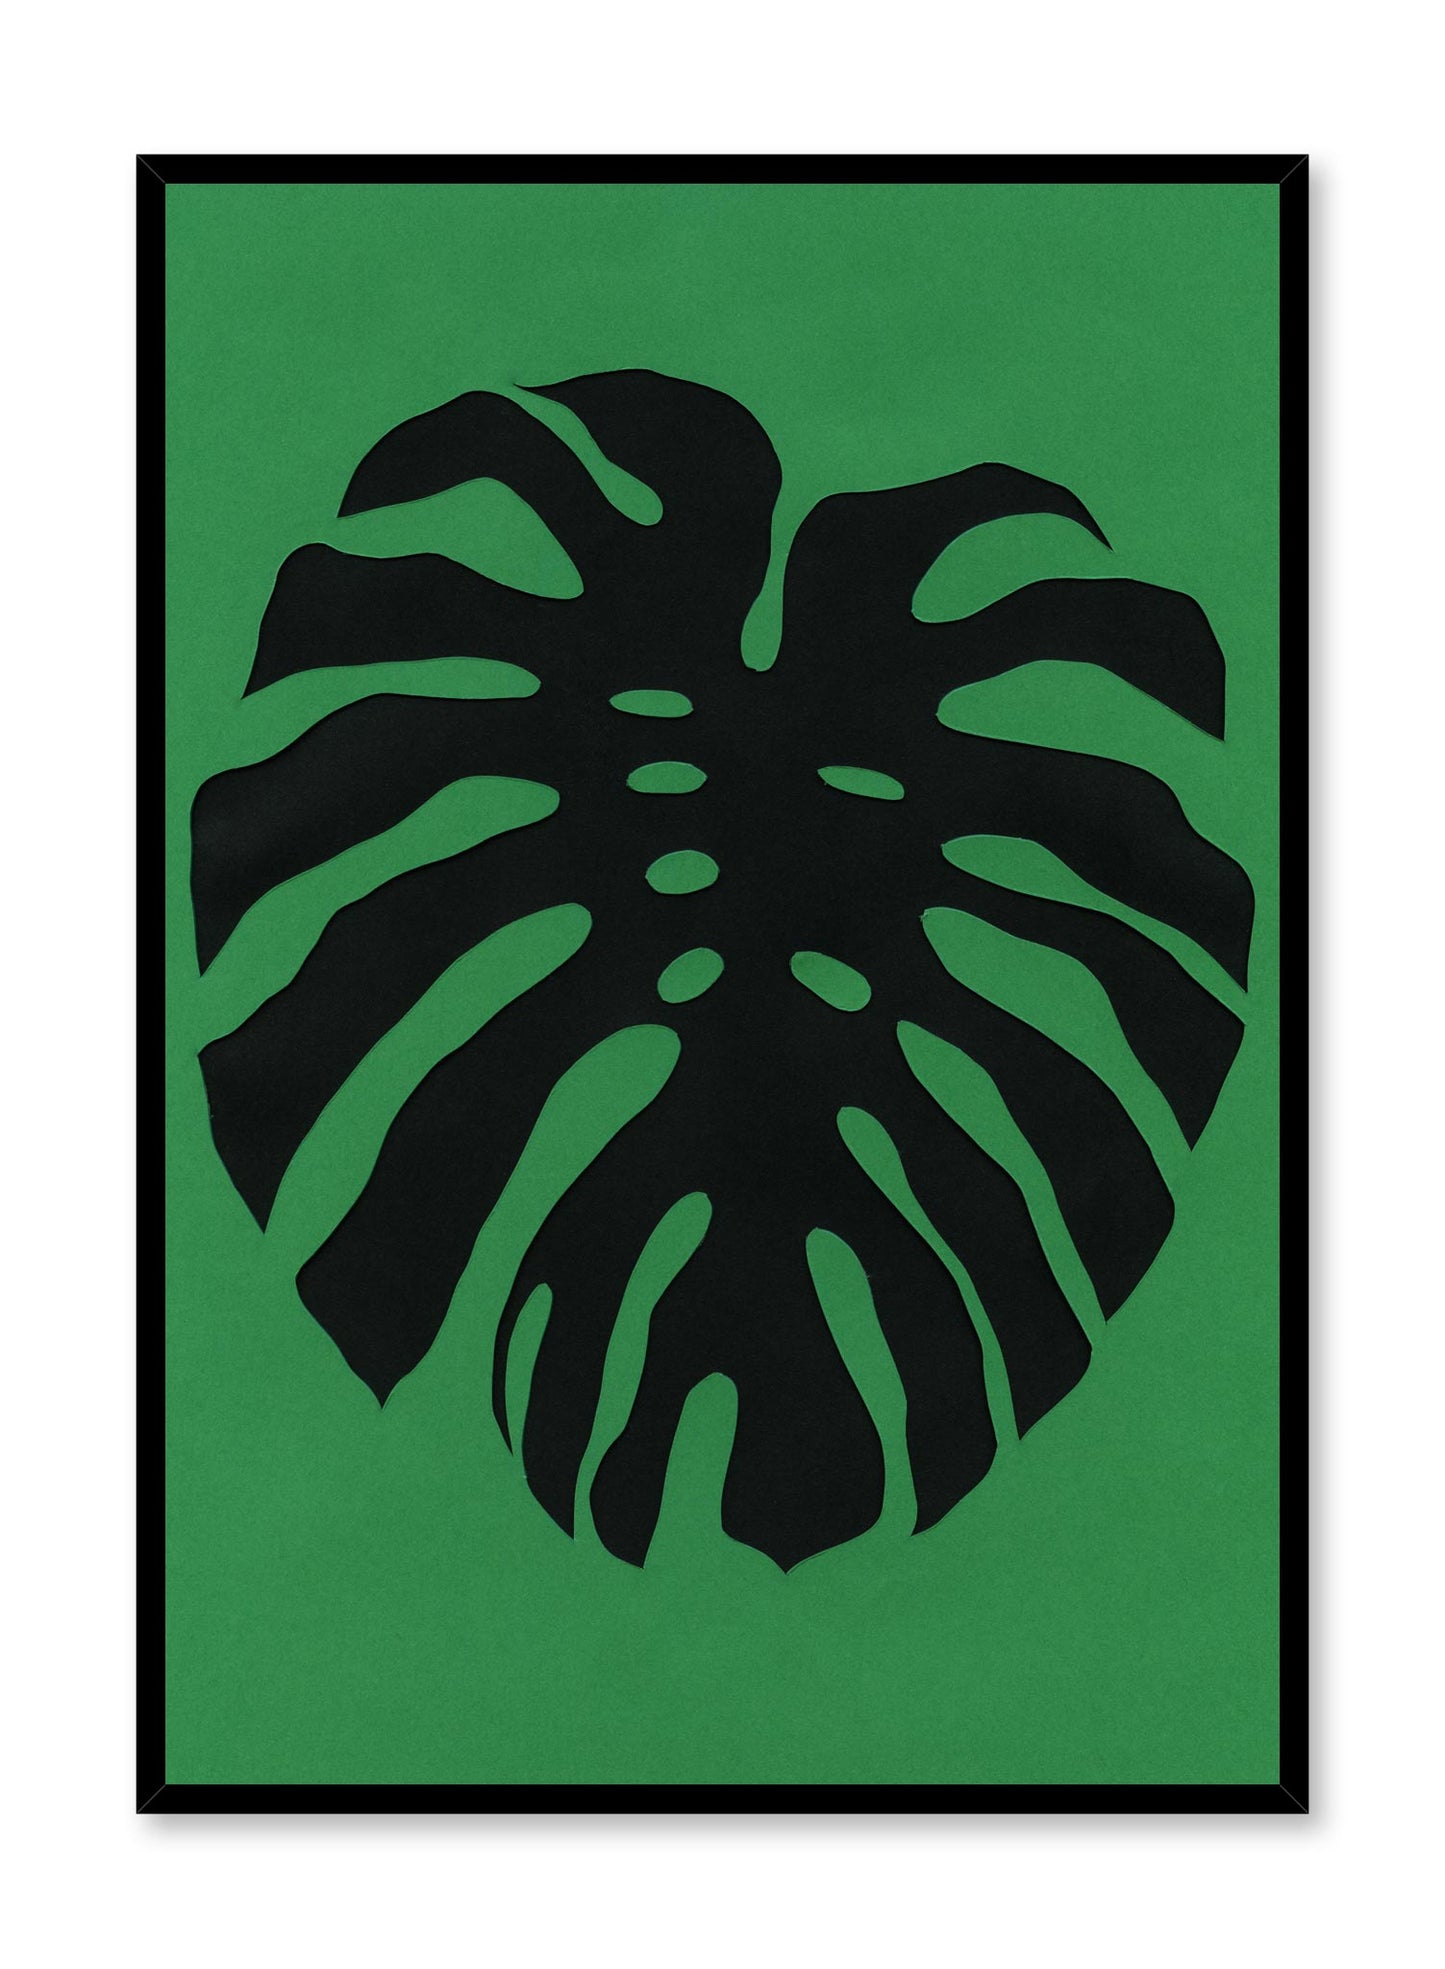 Modern minimalist poster by Opposite Wall with abstract collage illustration of monstera leaf